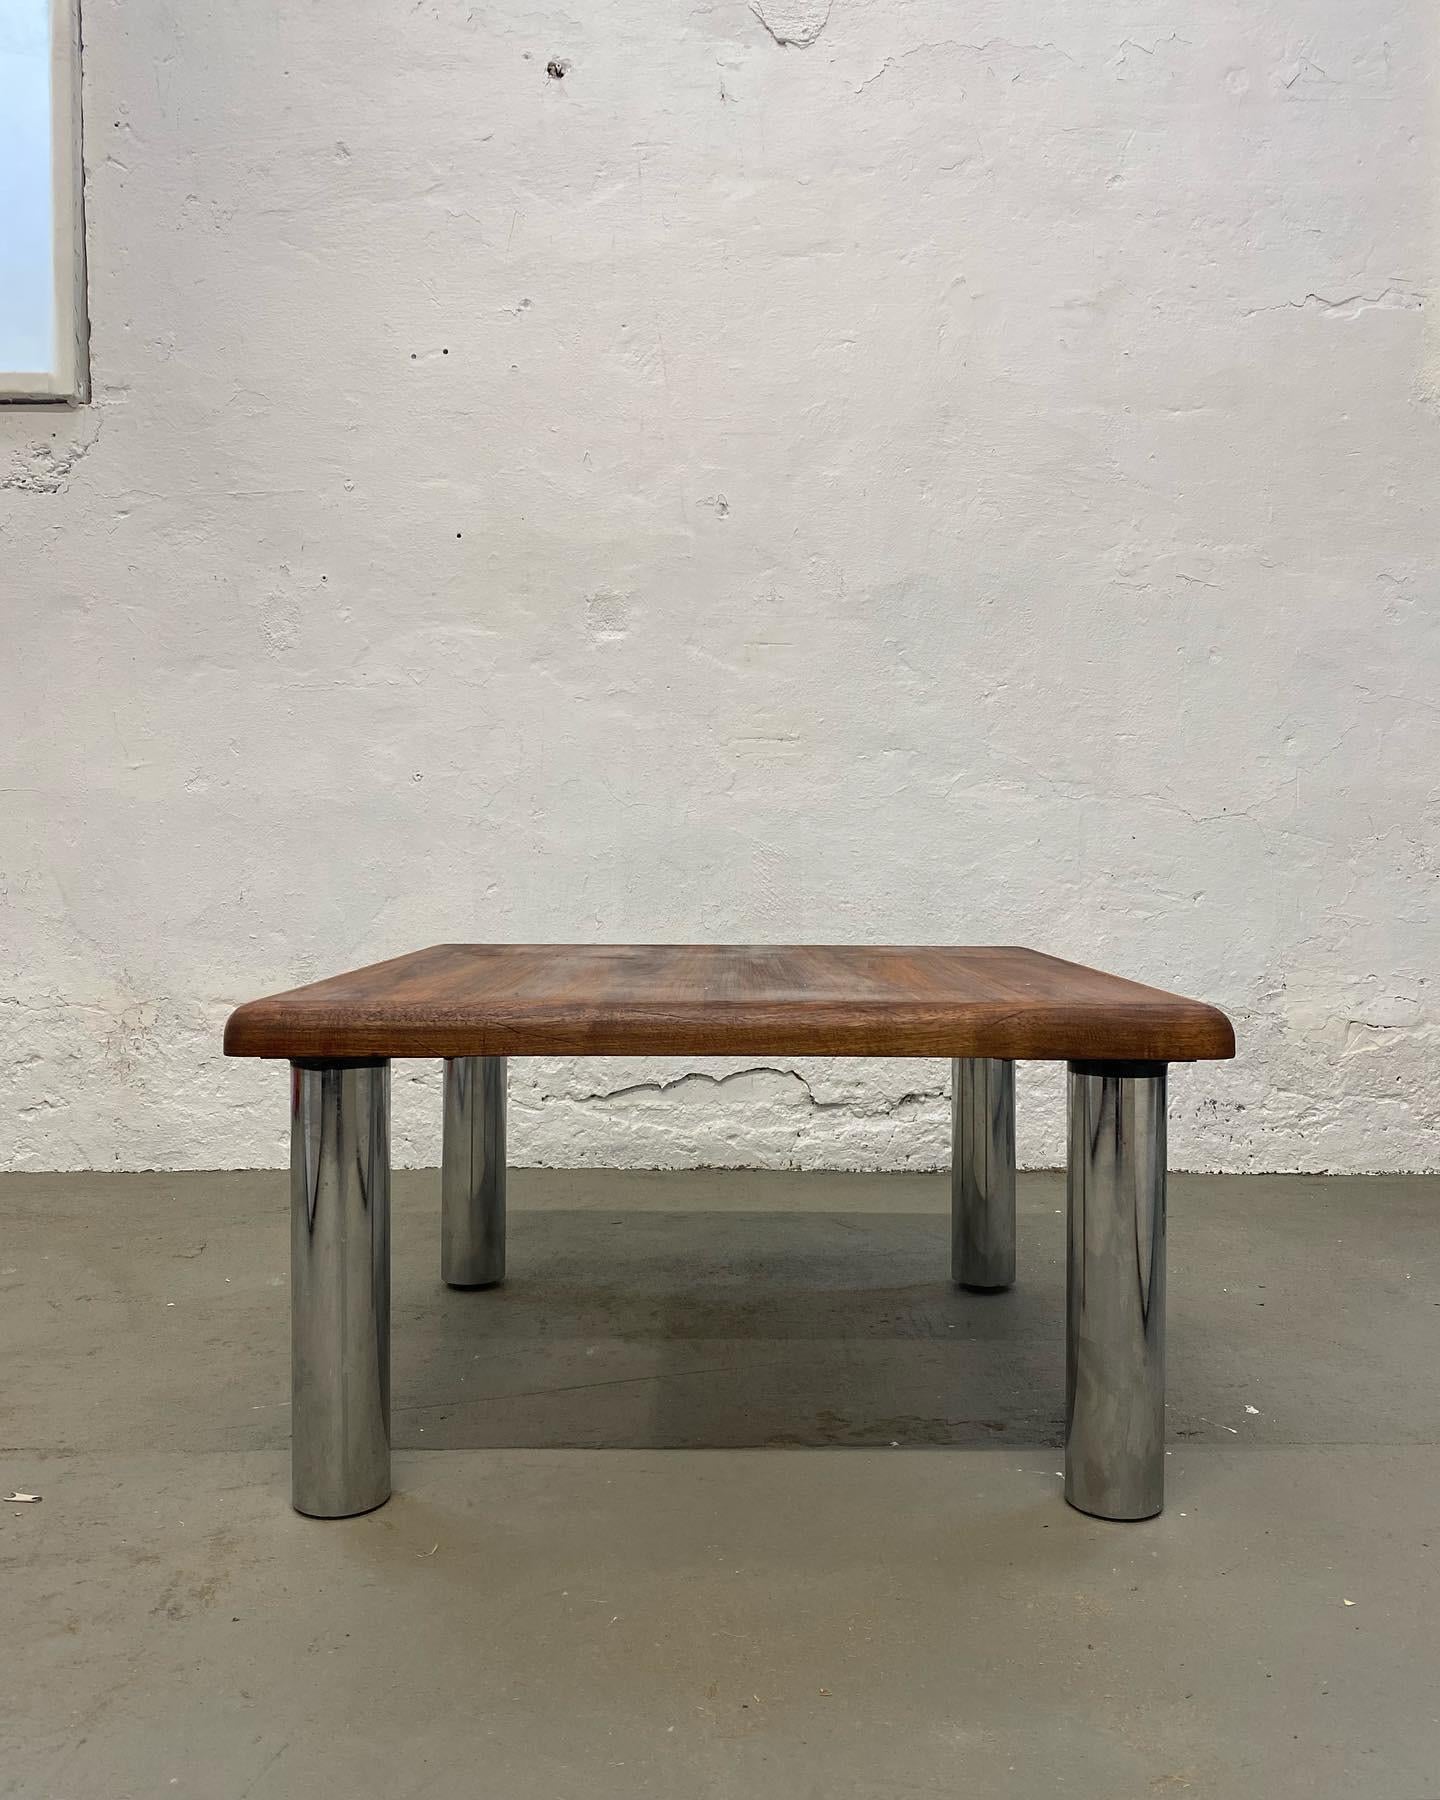 1970s Coffee Table  Staved Wood  Tubular Chrome Legs  In Good Condition For Sale In Paris, ON